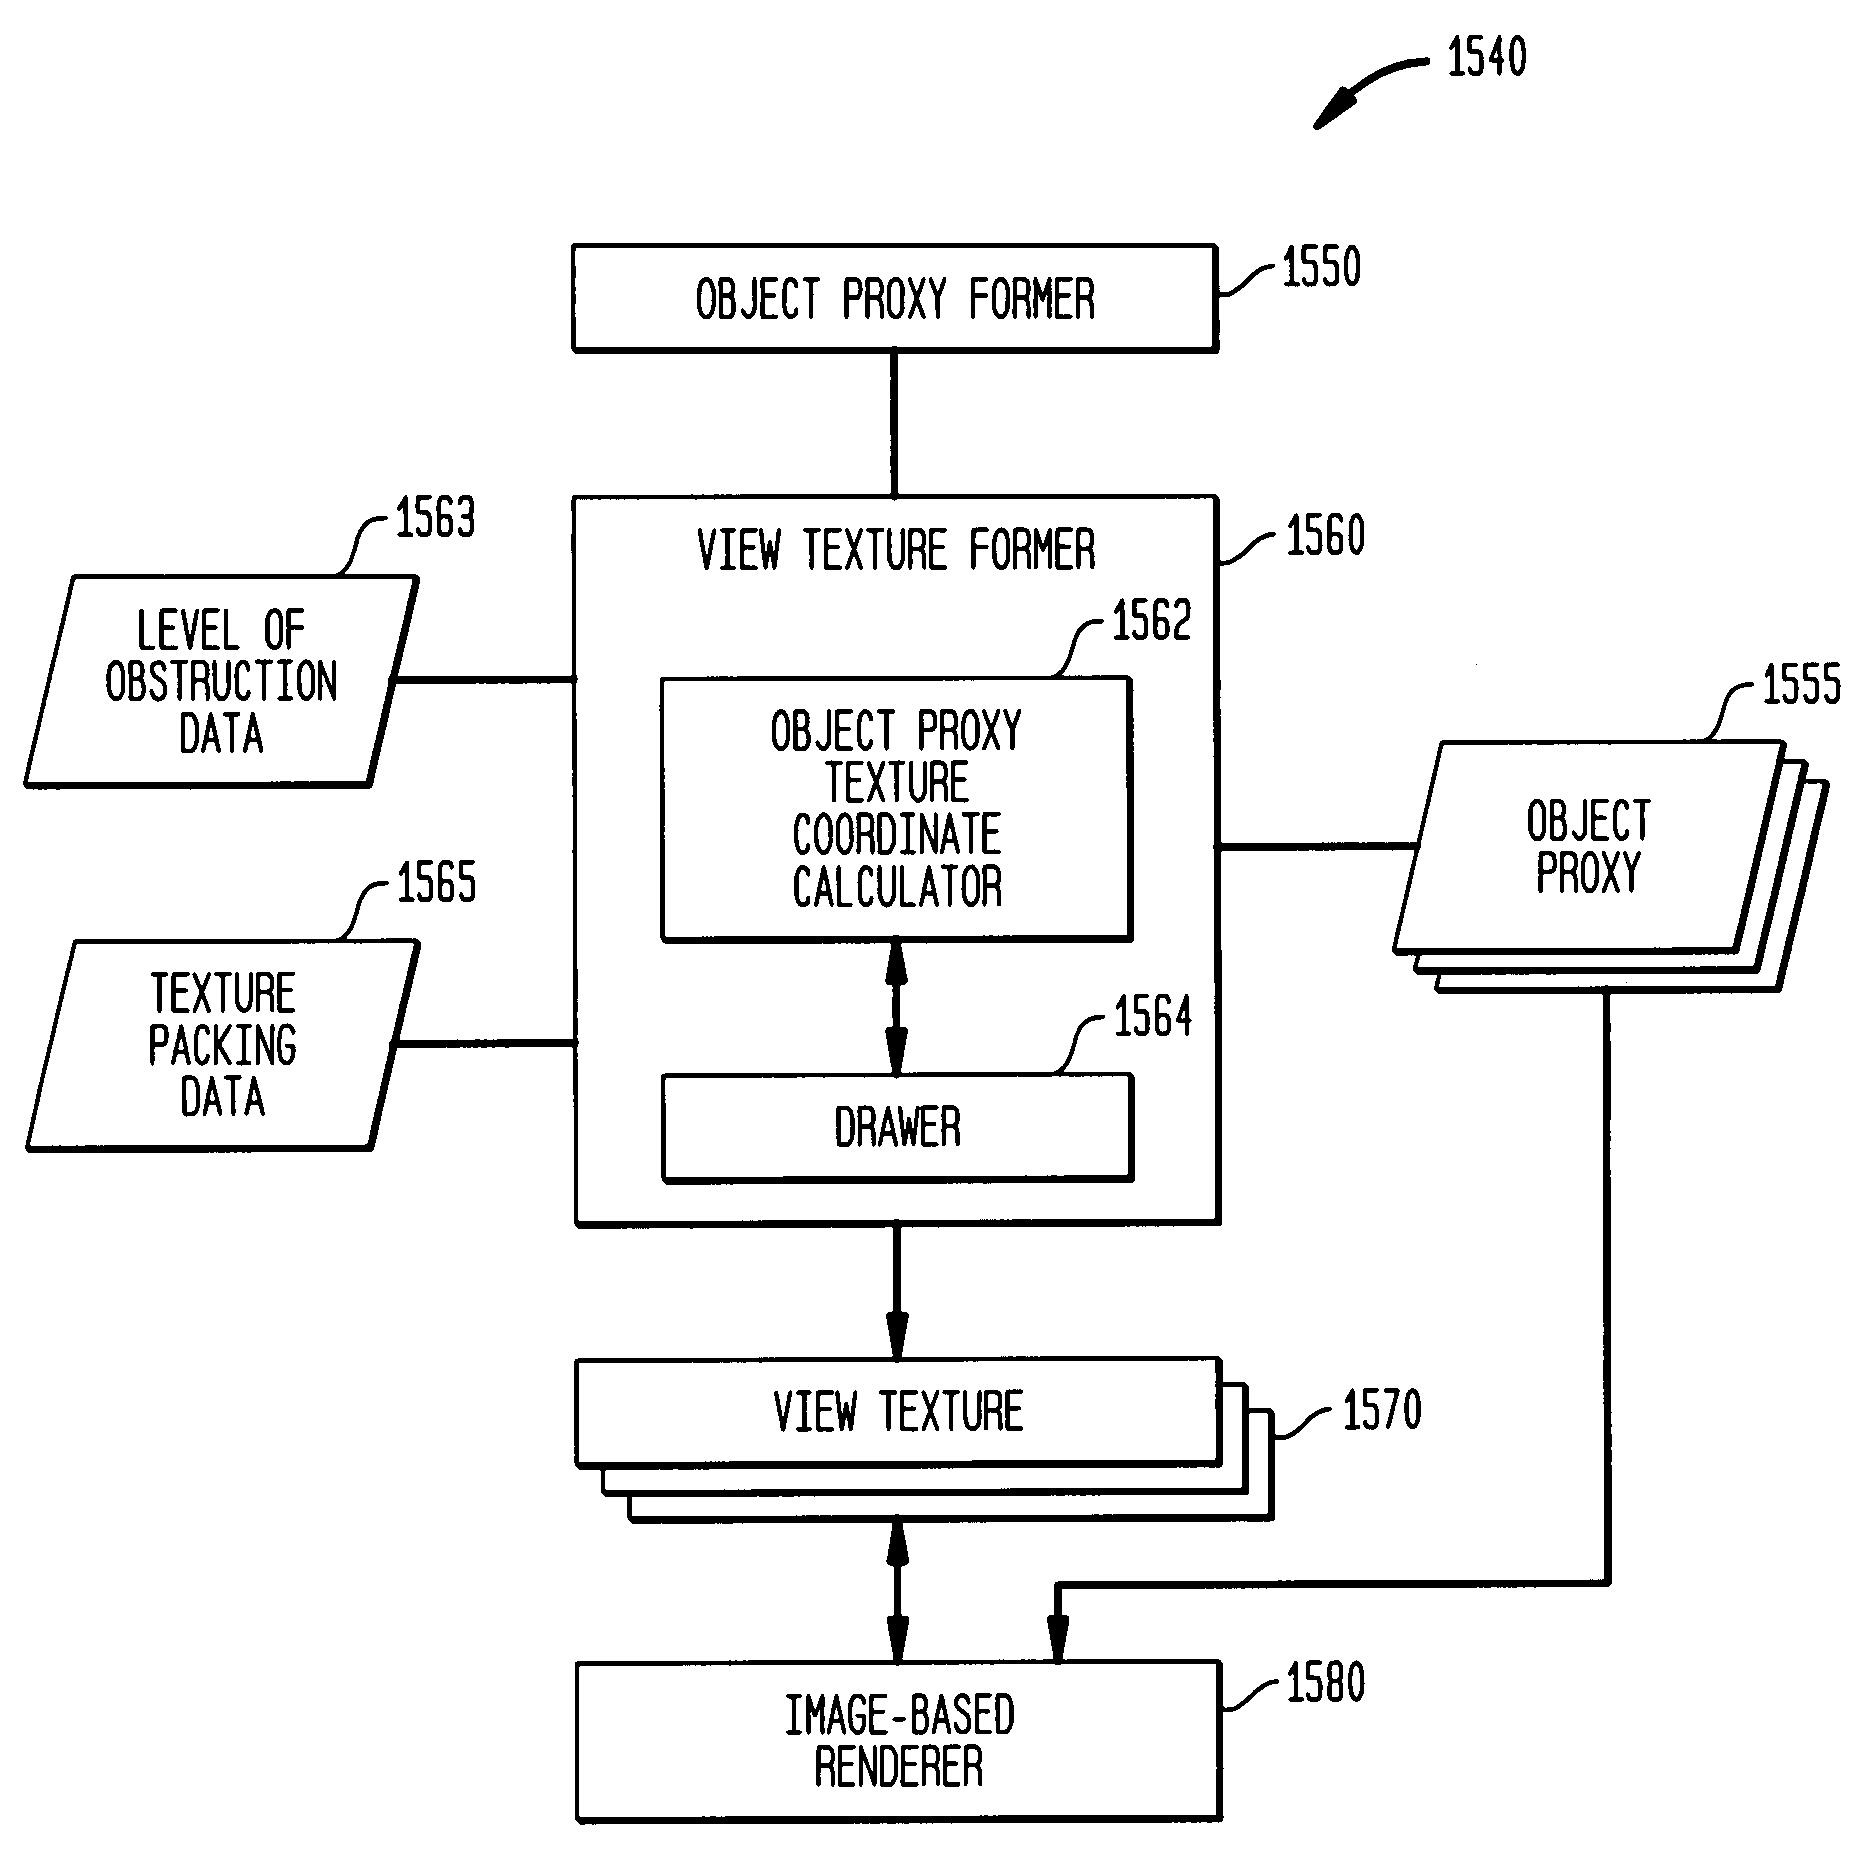 System and method for image-based rendering with object proxies